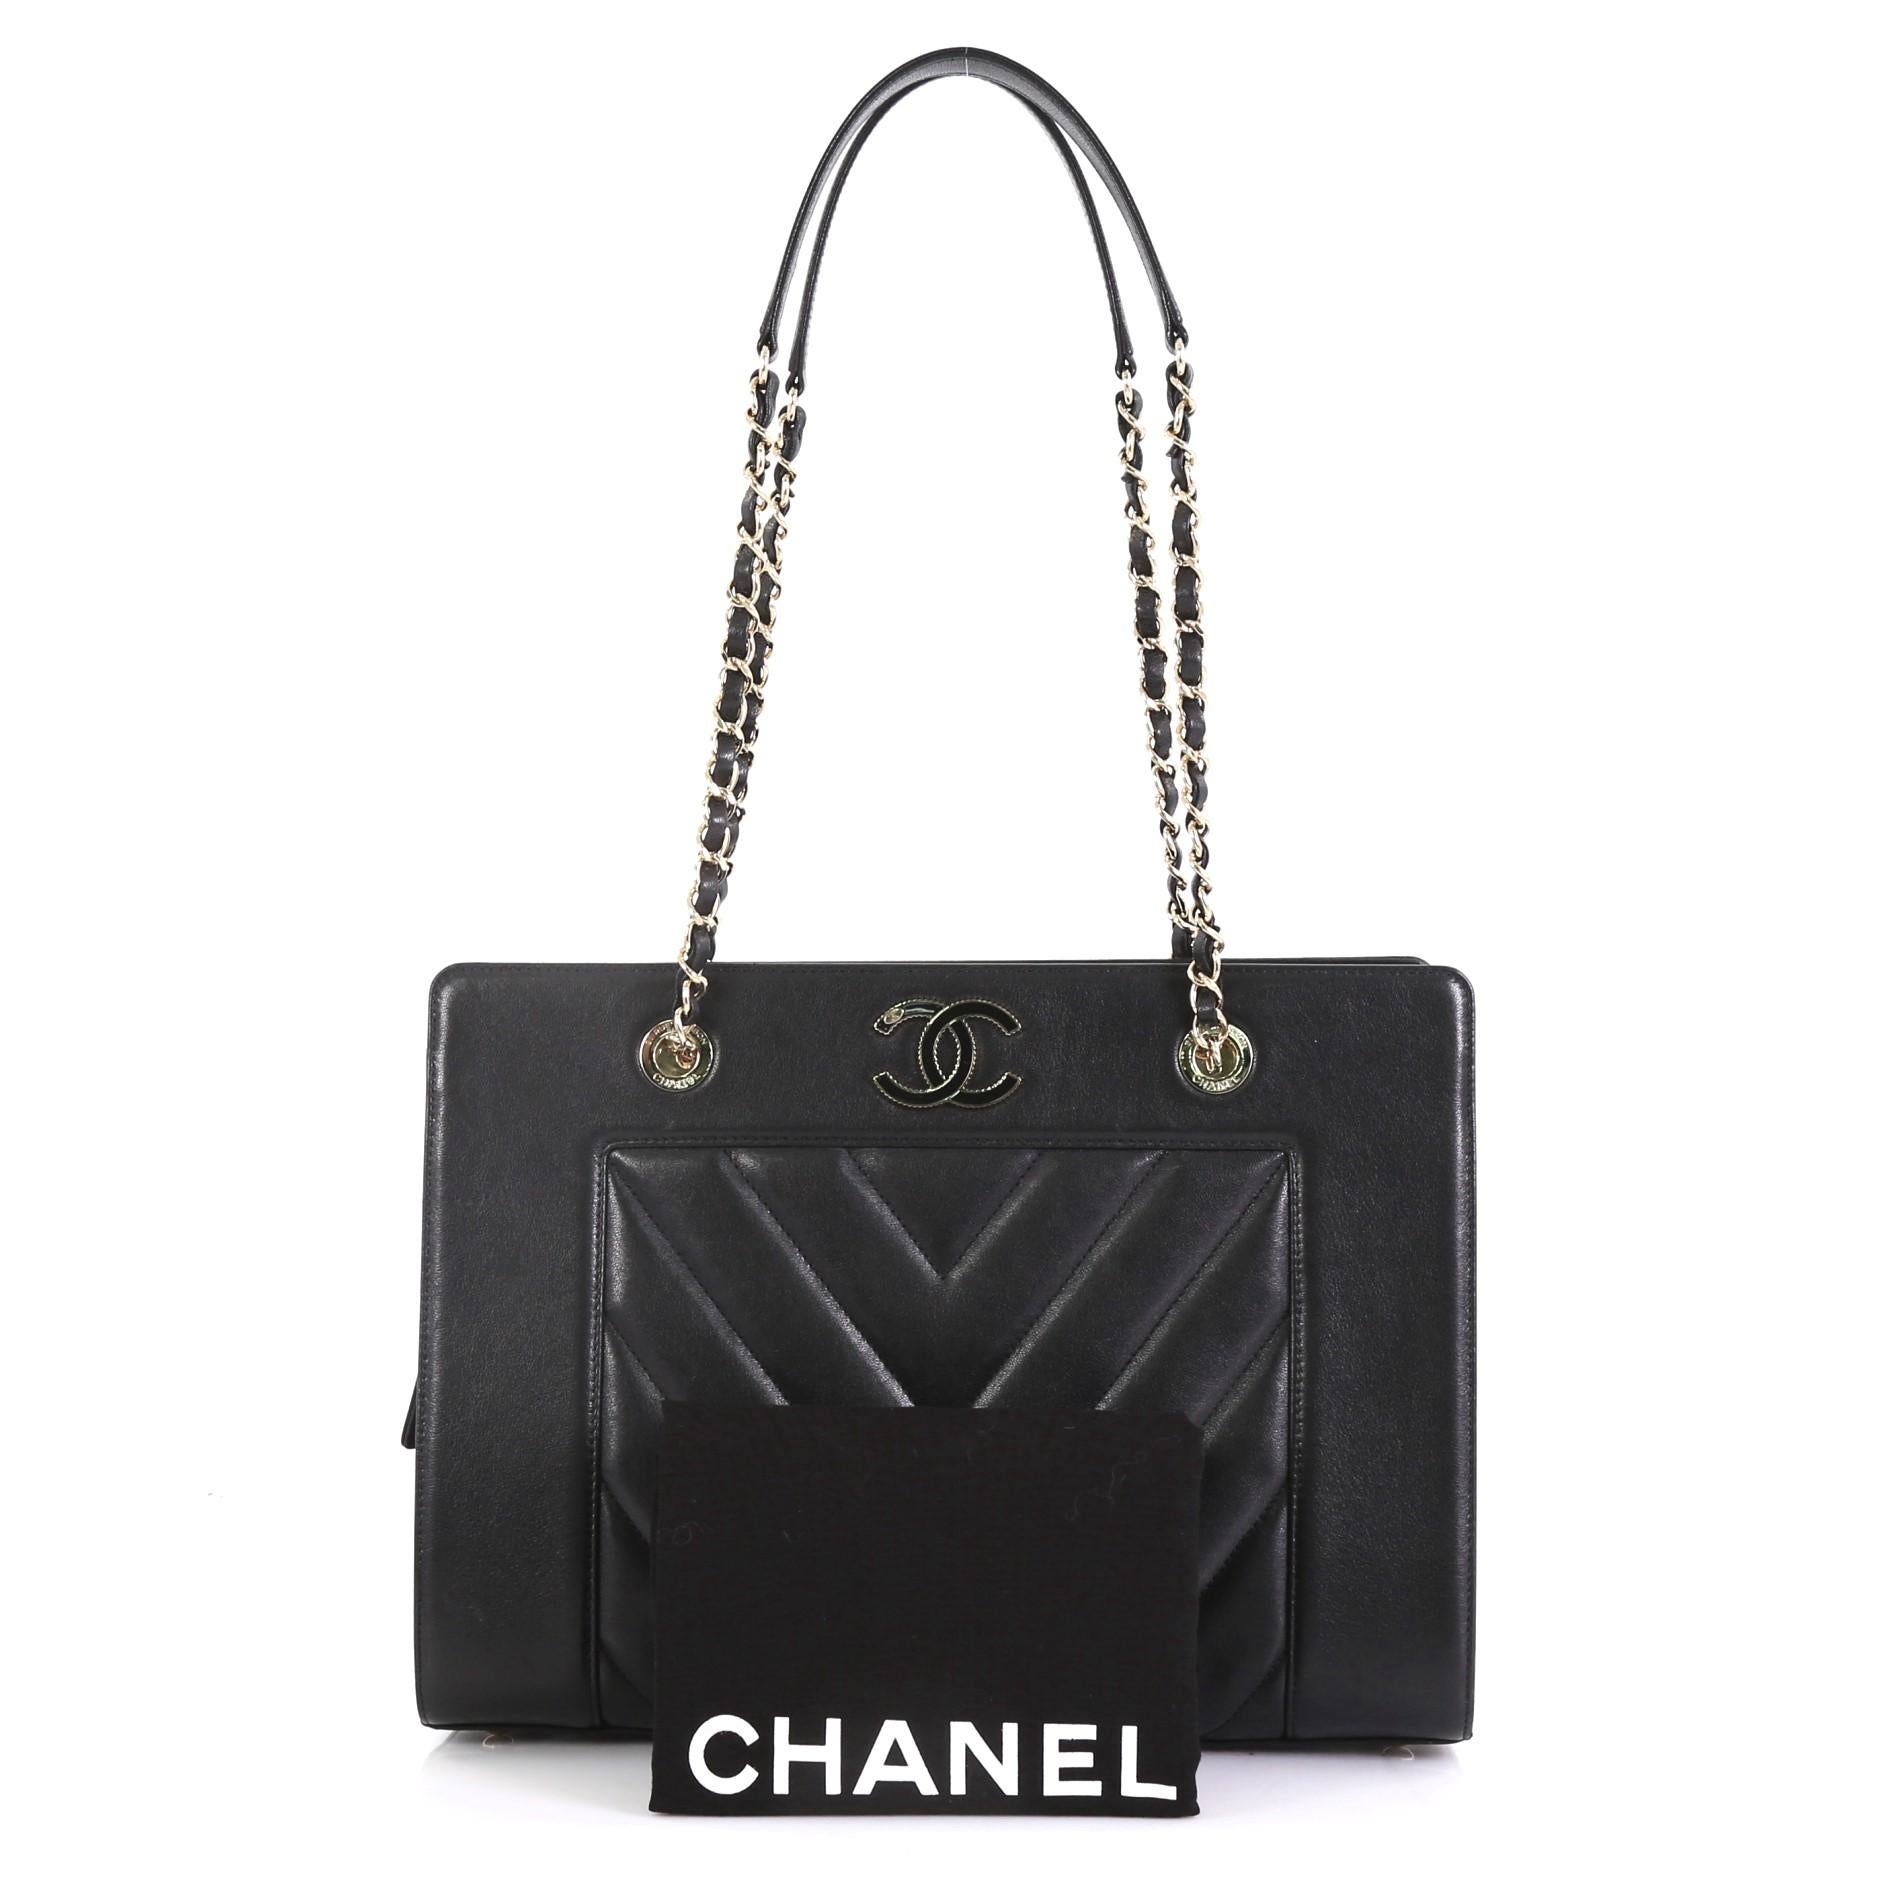 This Chanel Mademoiselle Vintage Shopping Tote Chevron Sheepskin Medium, crafted in black chevron sheepskin leather, features woven-in leather chain straps with leather pads, textured Chanel CC logo, protective base studs and gold-tone hardware